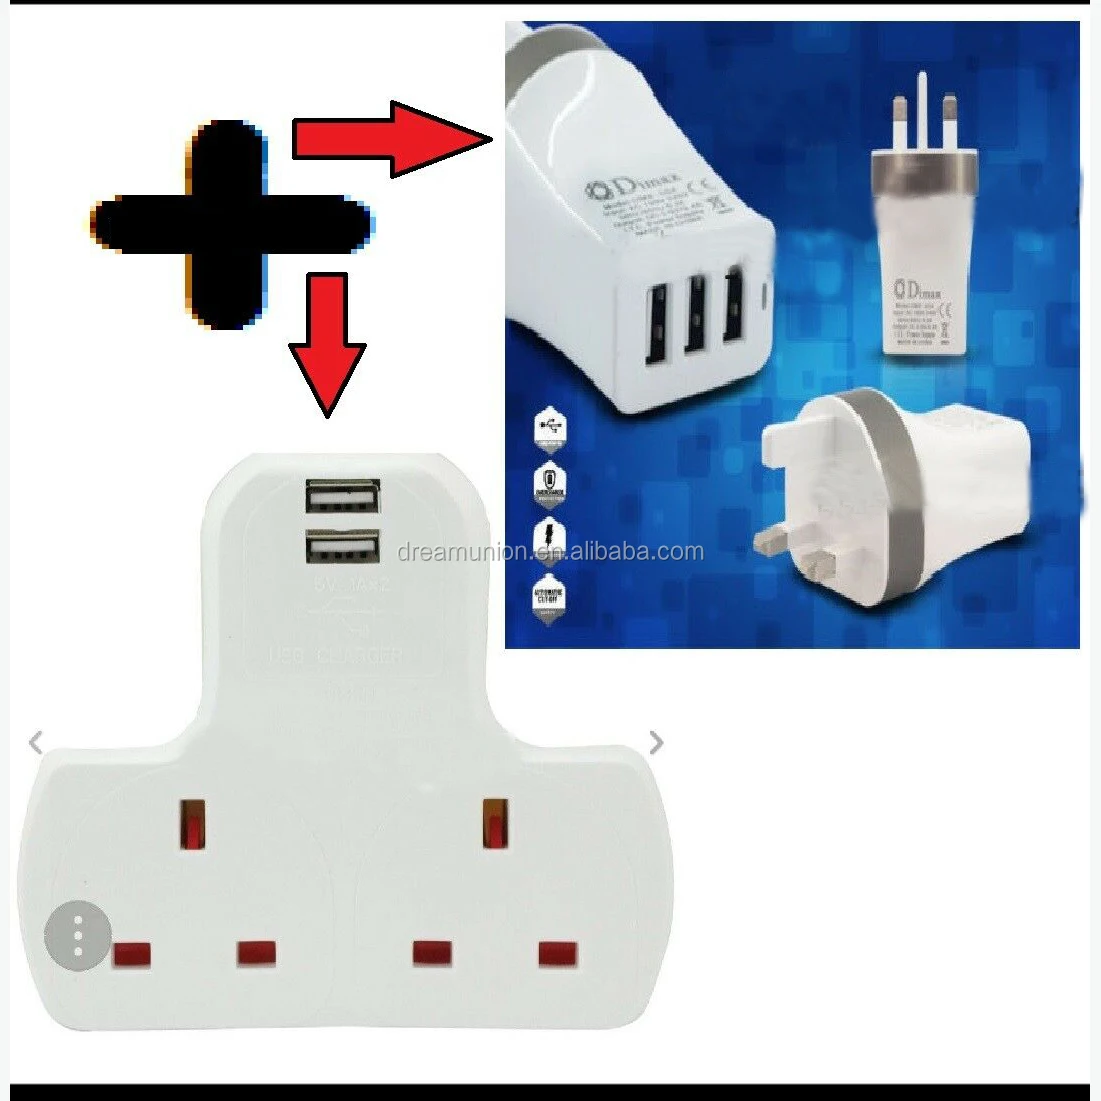 New 2 Way Gang Multi Wall Mains Plug Extension Adaptor With 2 USB Charge Ports 